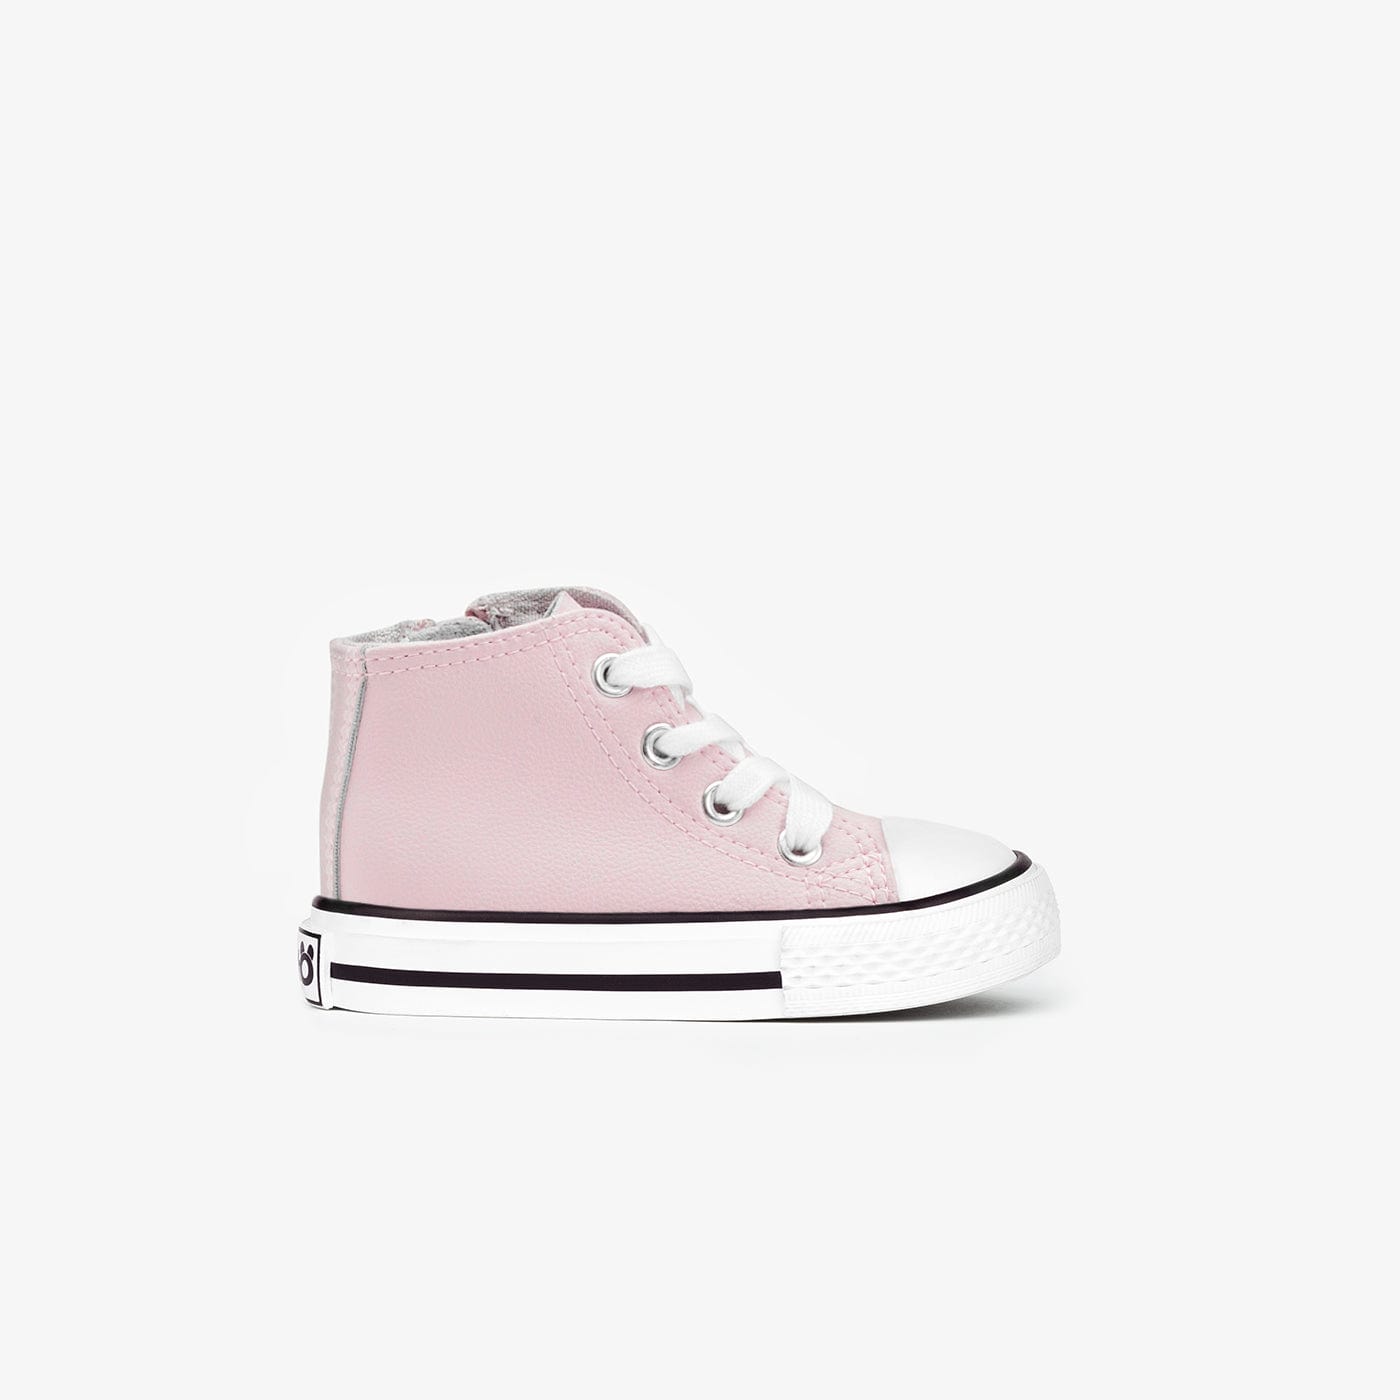 OSITO Shoes Baby's Pink Napa Hi-Top Sneakers